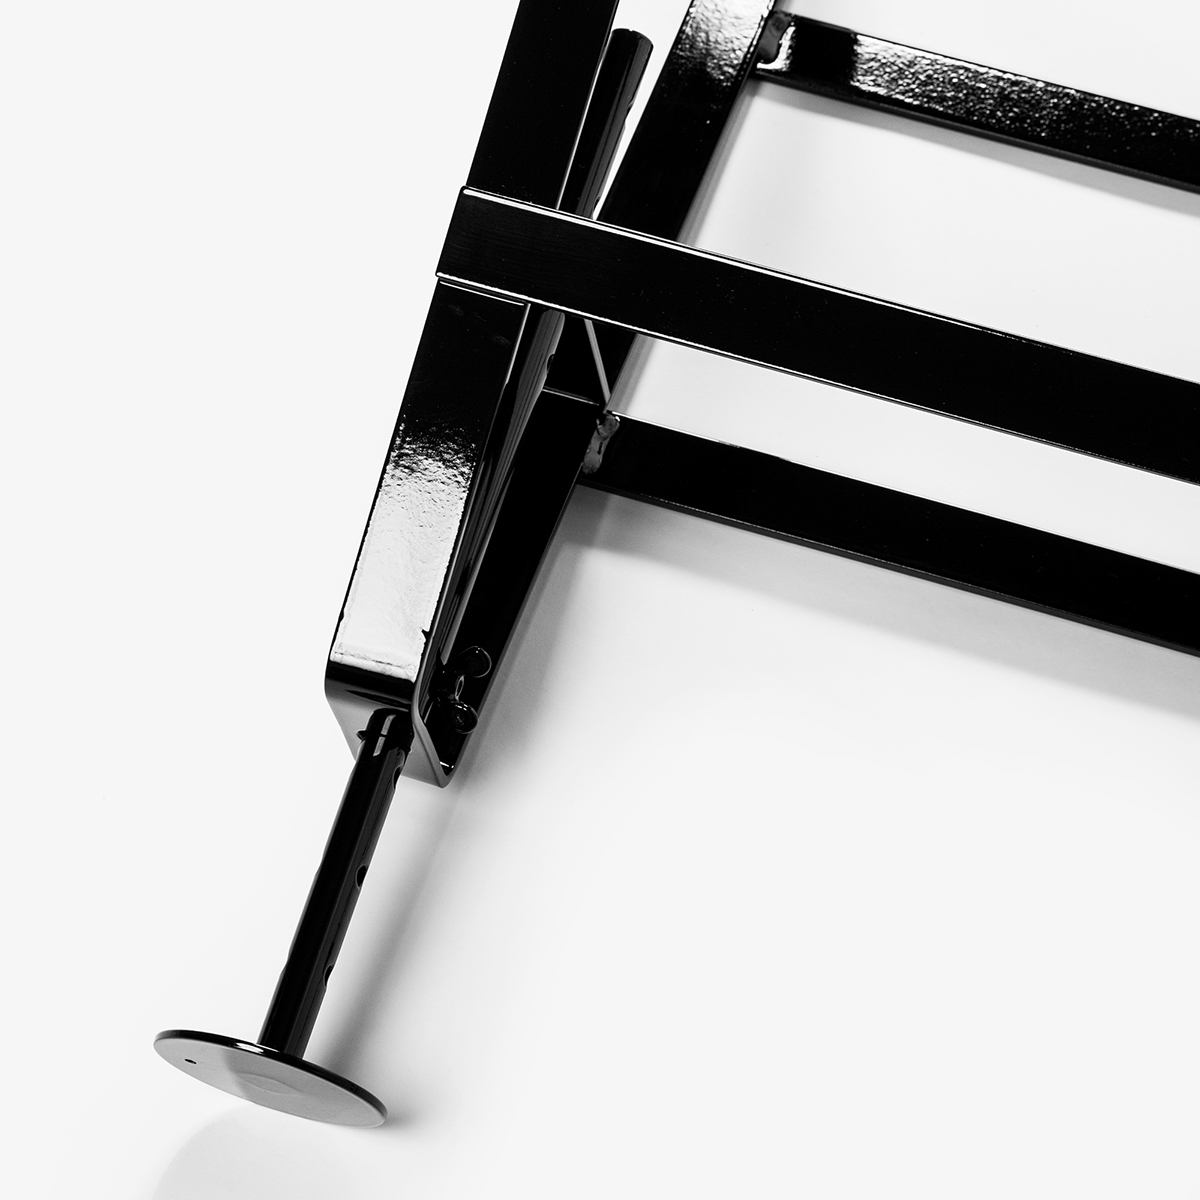 Design Thesenfitz & Wedekind A height adjustable trestle made from crude steel powder-coated in black glossy